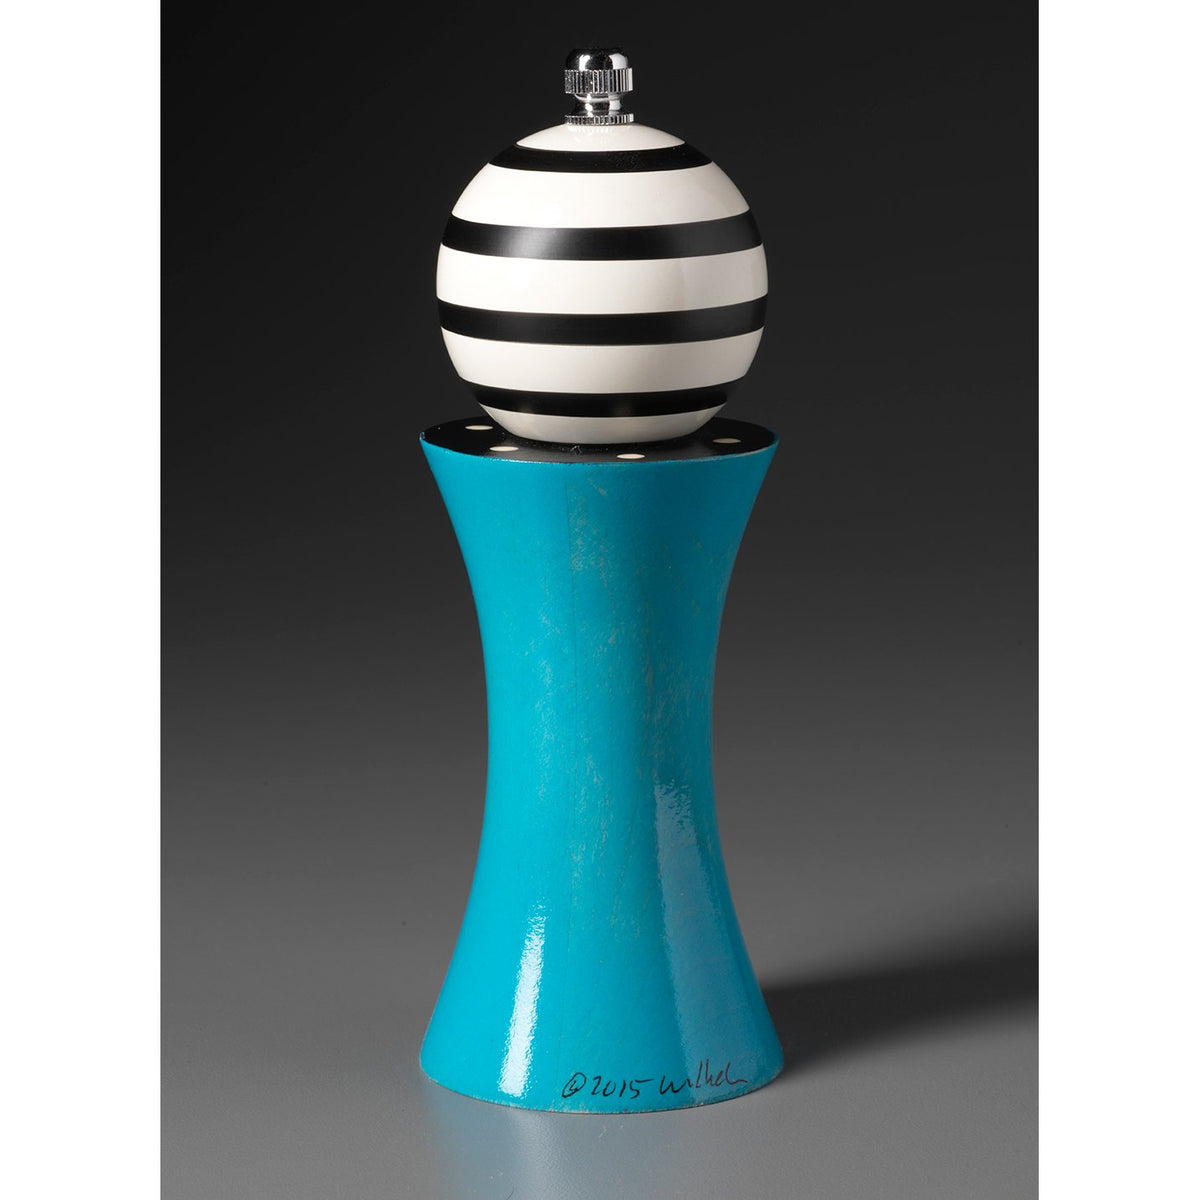 http://www.sweetheartgallery.com/cdn/shop/products/Wood-Salt-or-Pepper-Mill-Grinder-Alpha-in-Turquoise-Black-and-White-by-Robert-Wilhelm-of-Raw-Design-Artistic-Artisan-Designer-Handmade-Wood-Salt-And-Pepper-Mills-Grinders-and-Shakers_1200x1200.jpg?v=1590419448